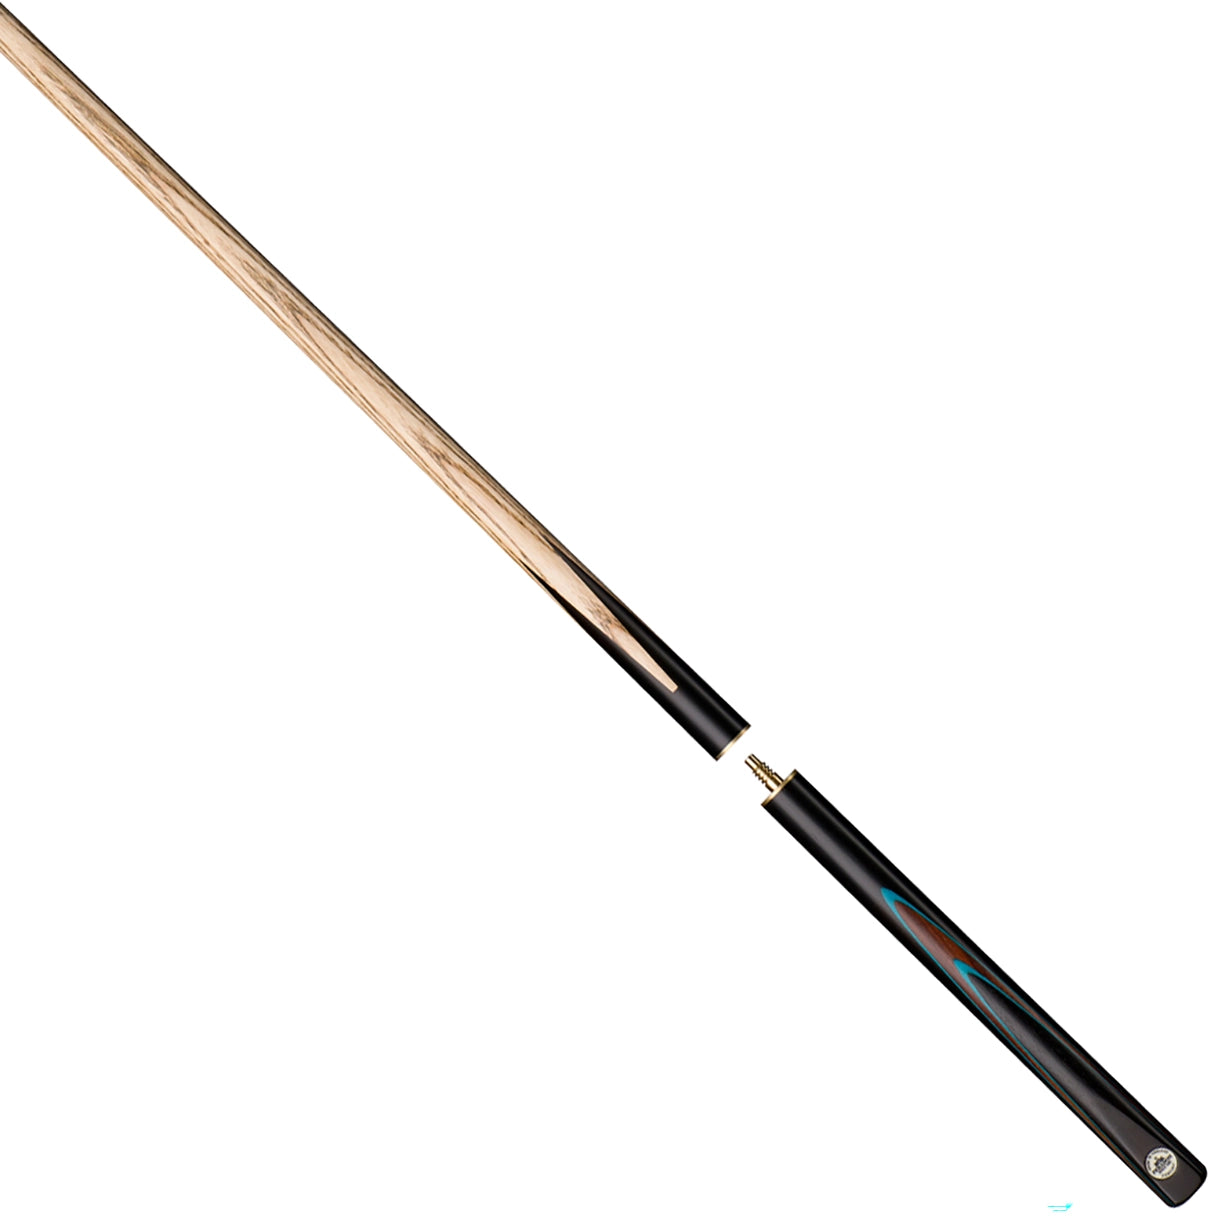 Peradon Century 3/4 Jointed Snooker Cue. Seperated view